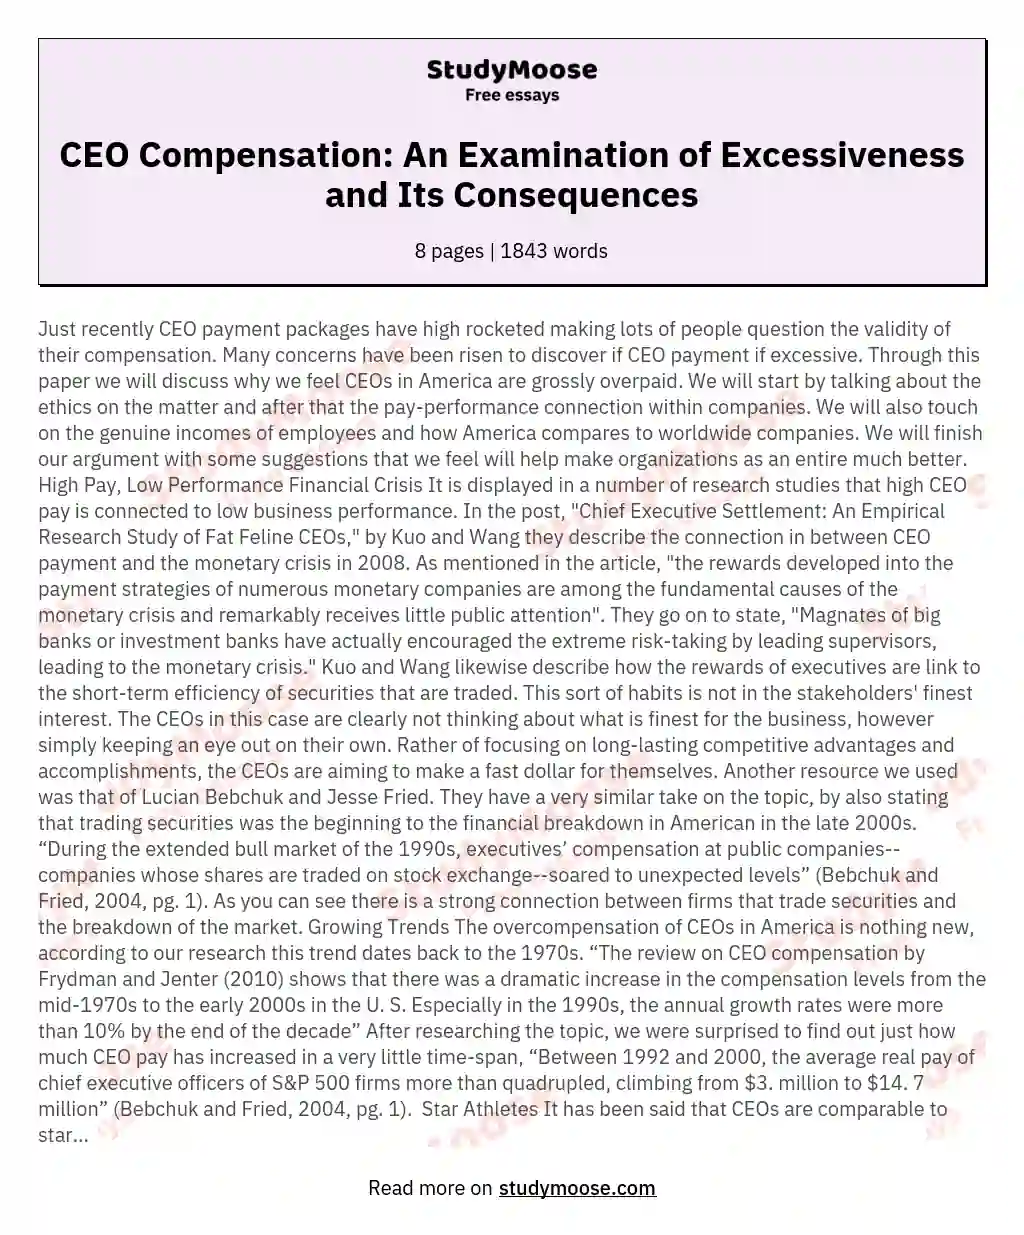 CEO Compensation: An Examination of Excessiveness and Its Consequences essay